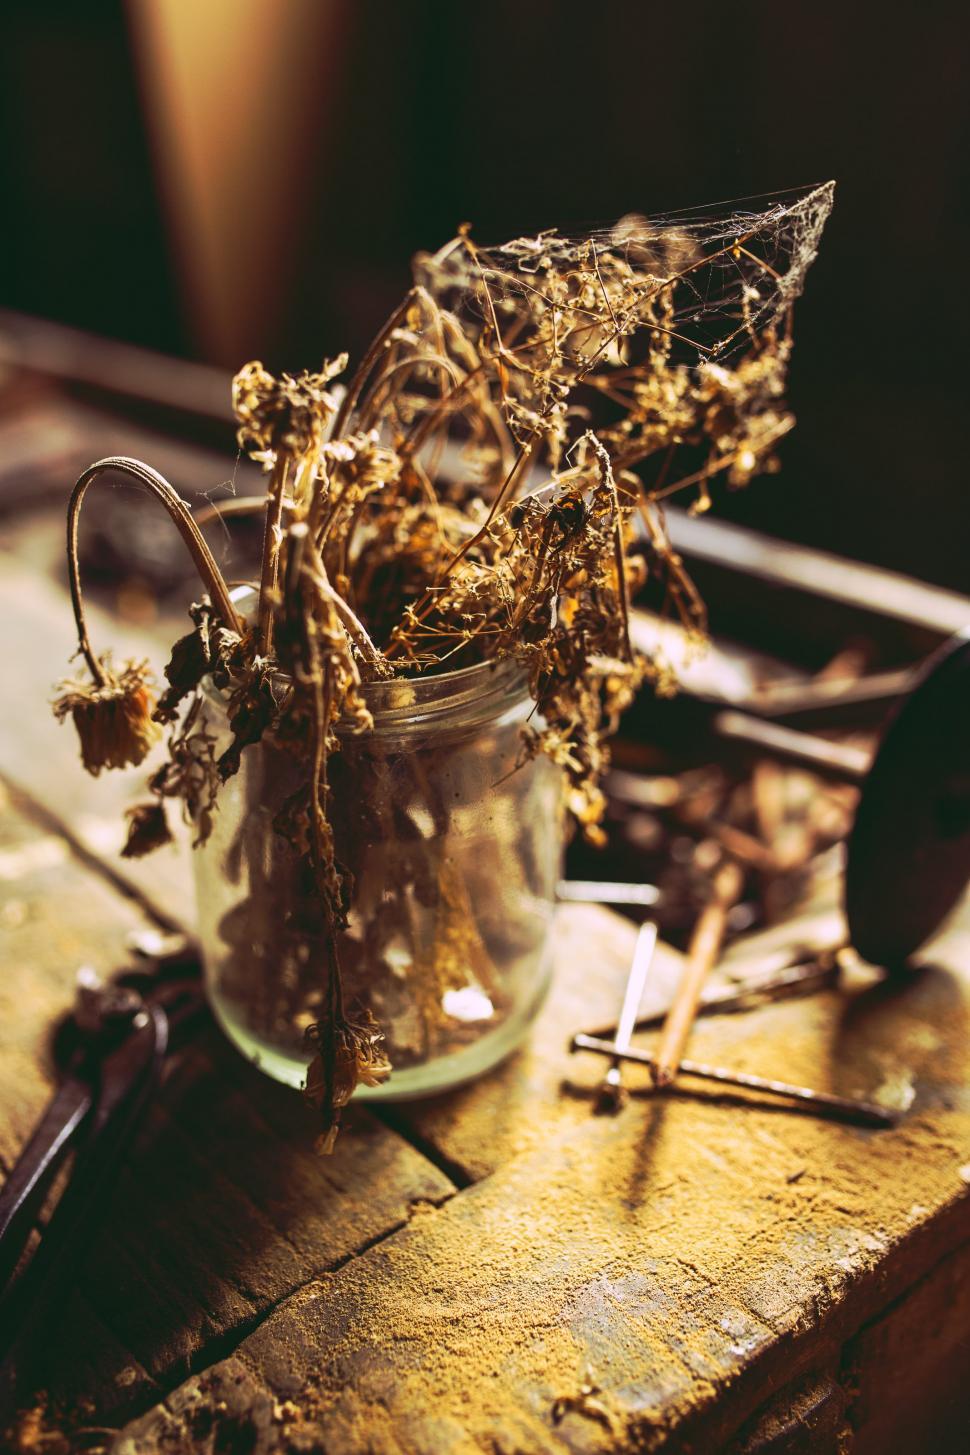 Free Image of Jar of Dried Flowers on Wooden Table 